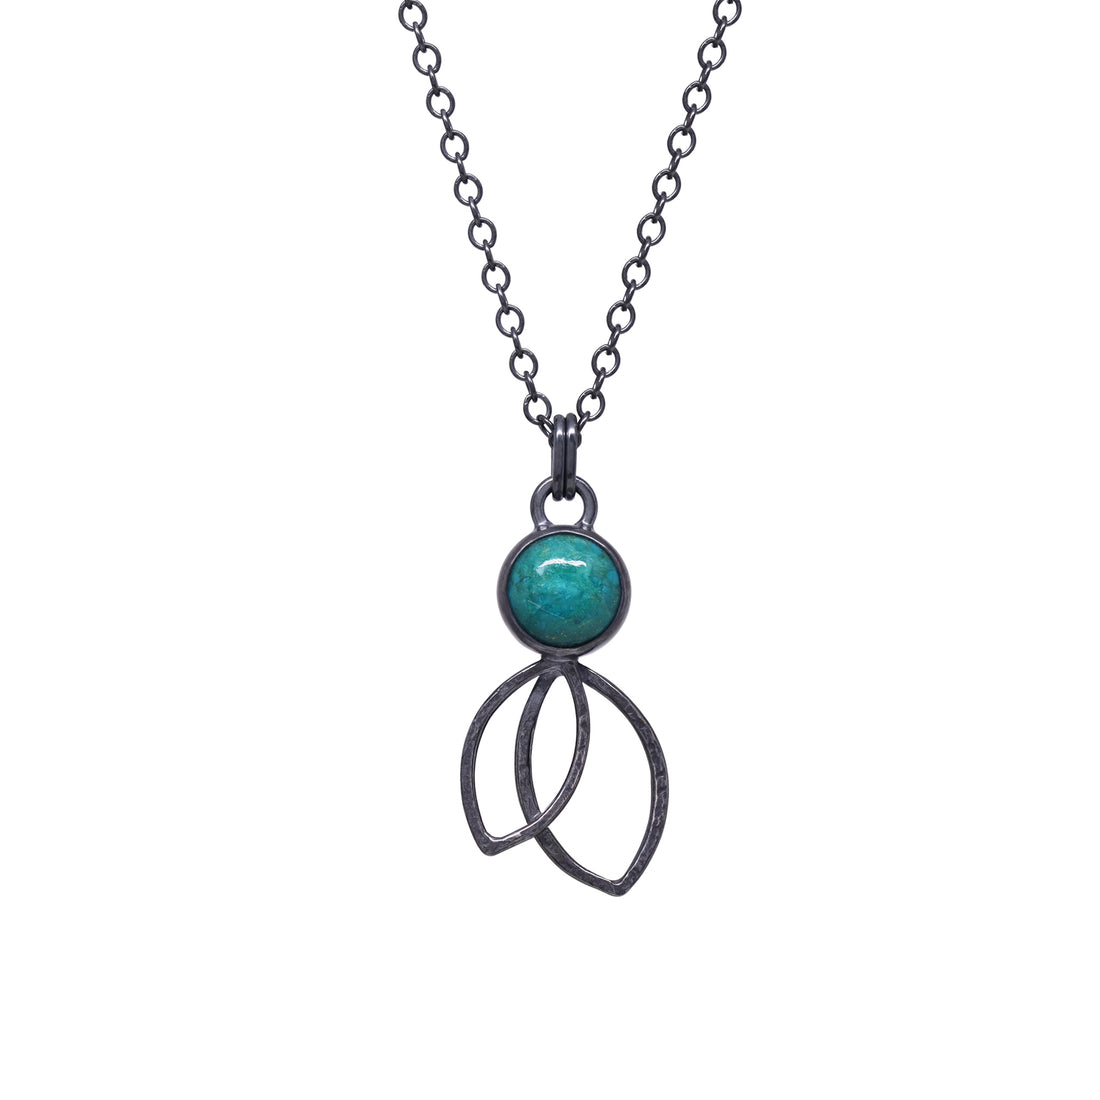 Double Leaf Necklace Small - Chrysocolla - Dark Sterling